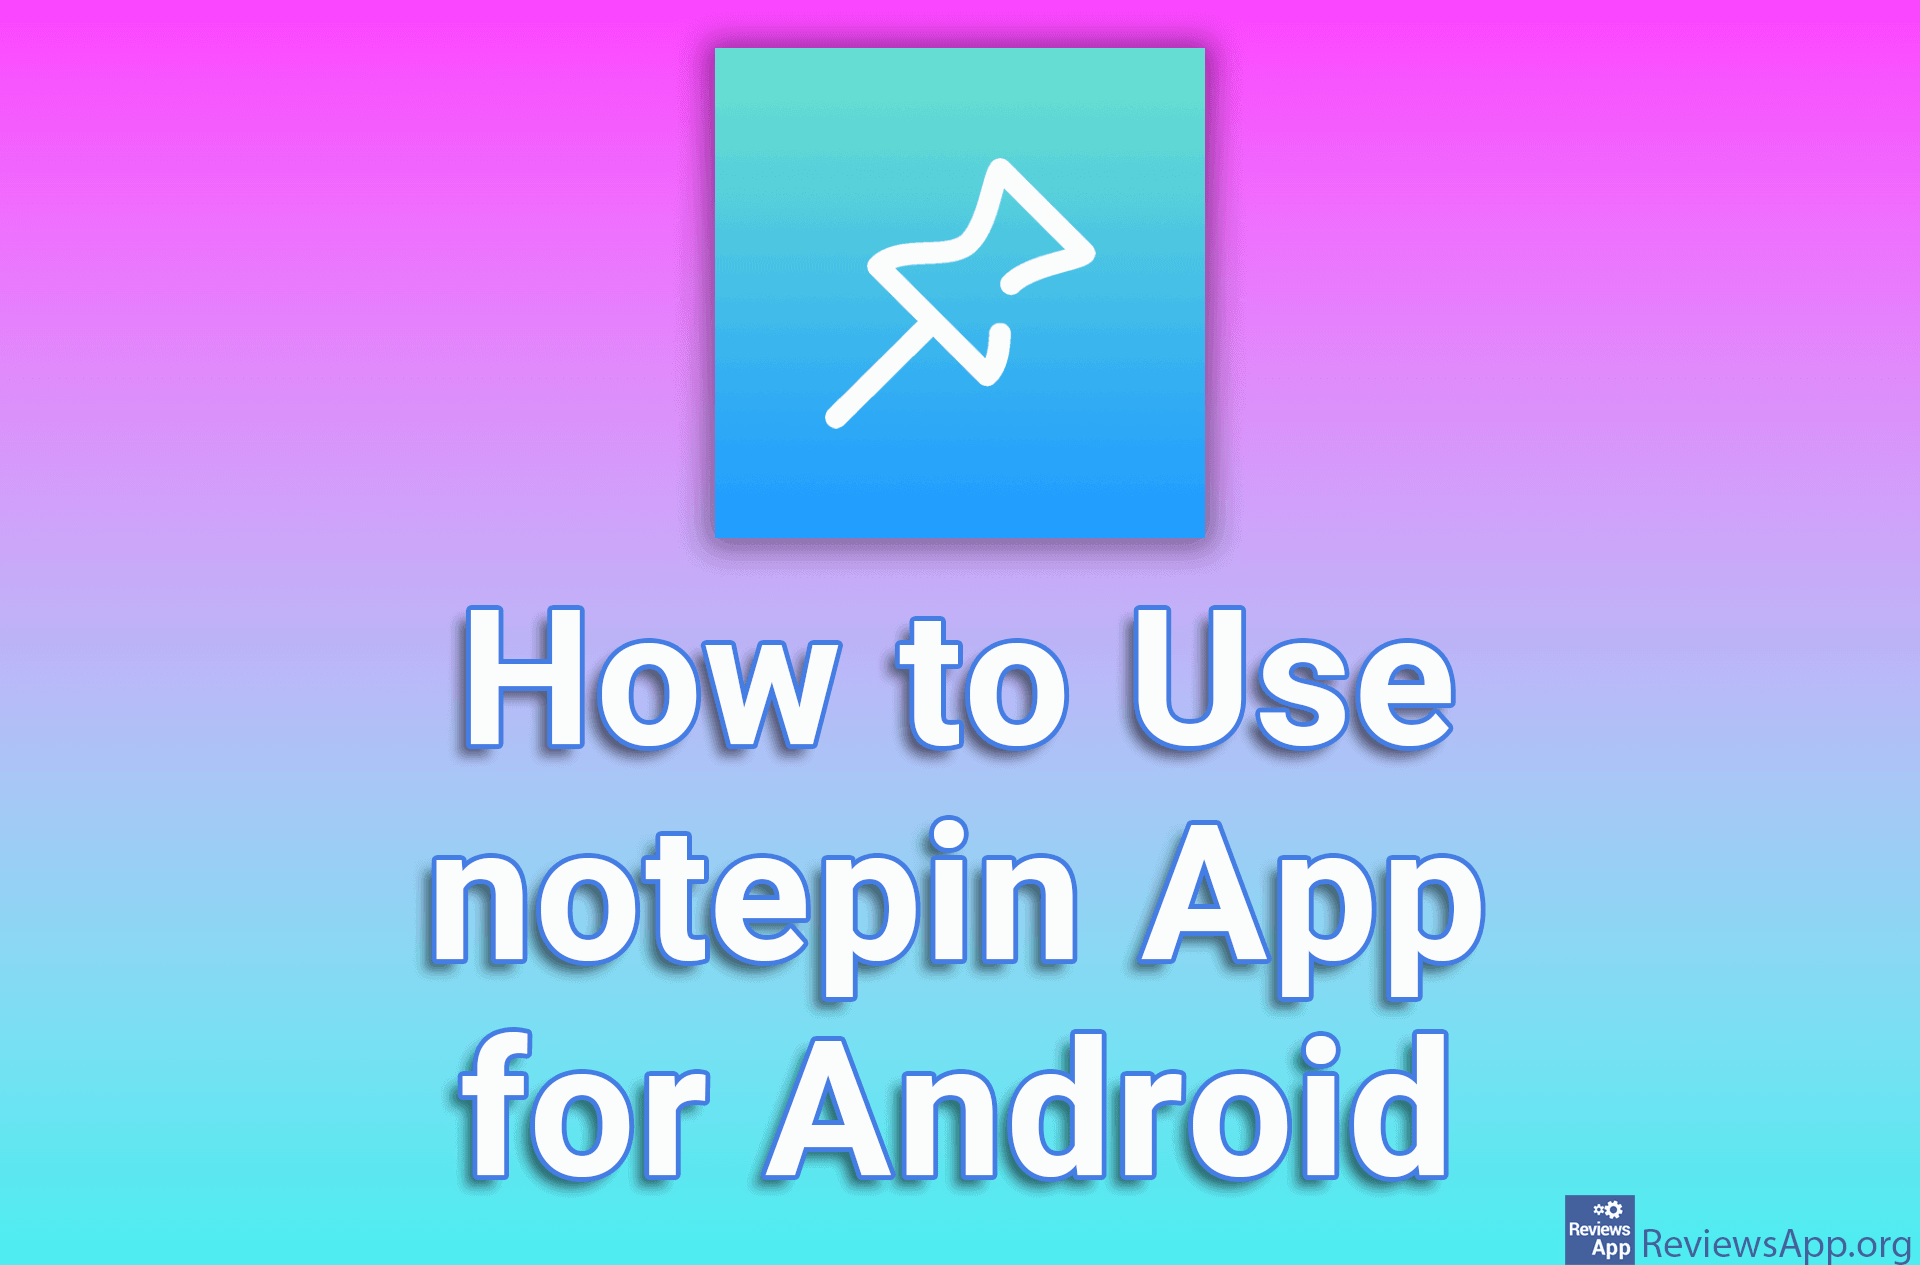 How to Use notepin App for Android